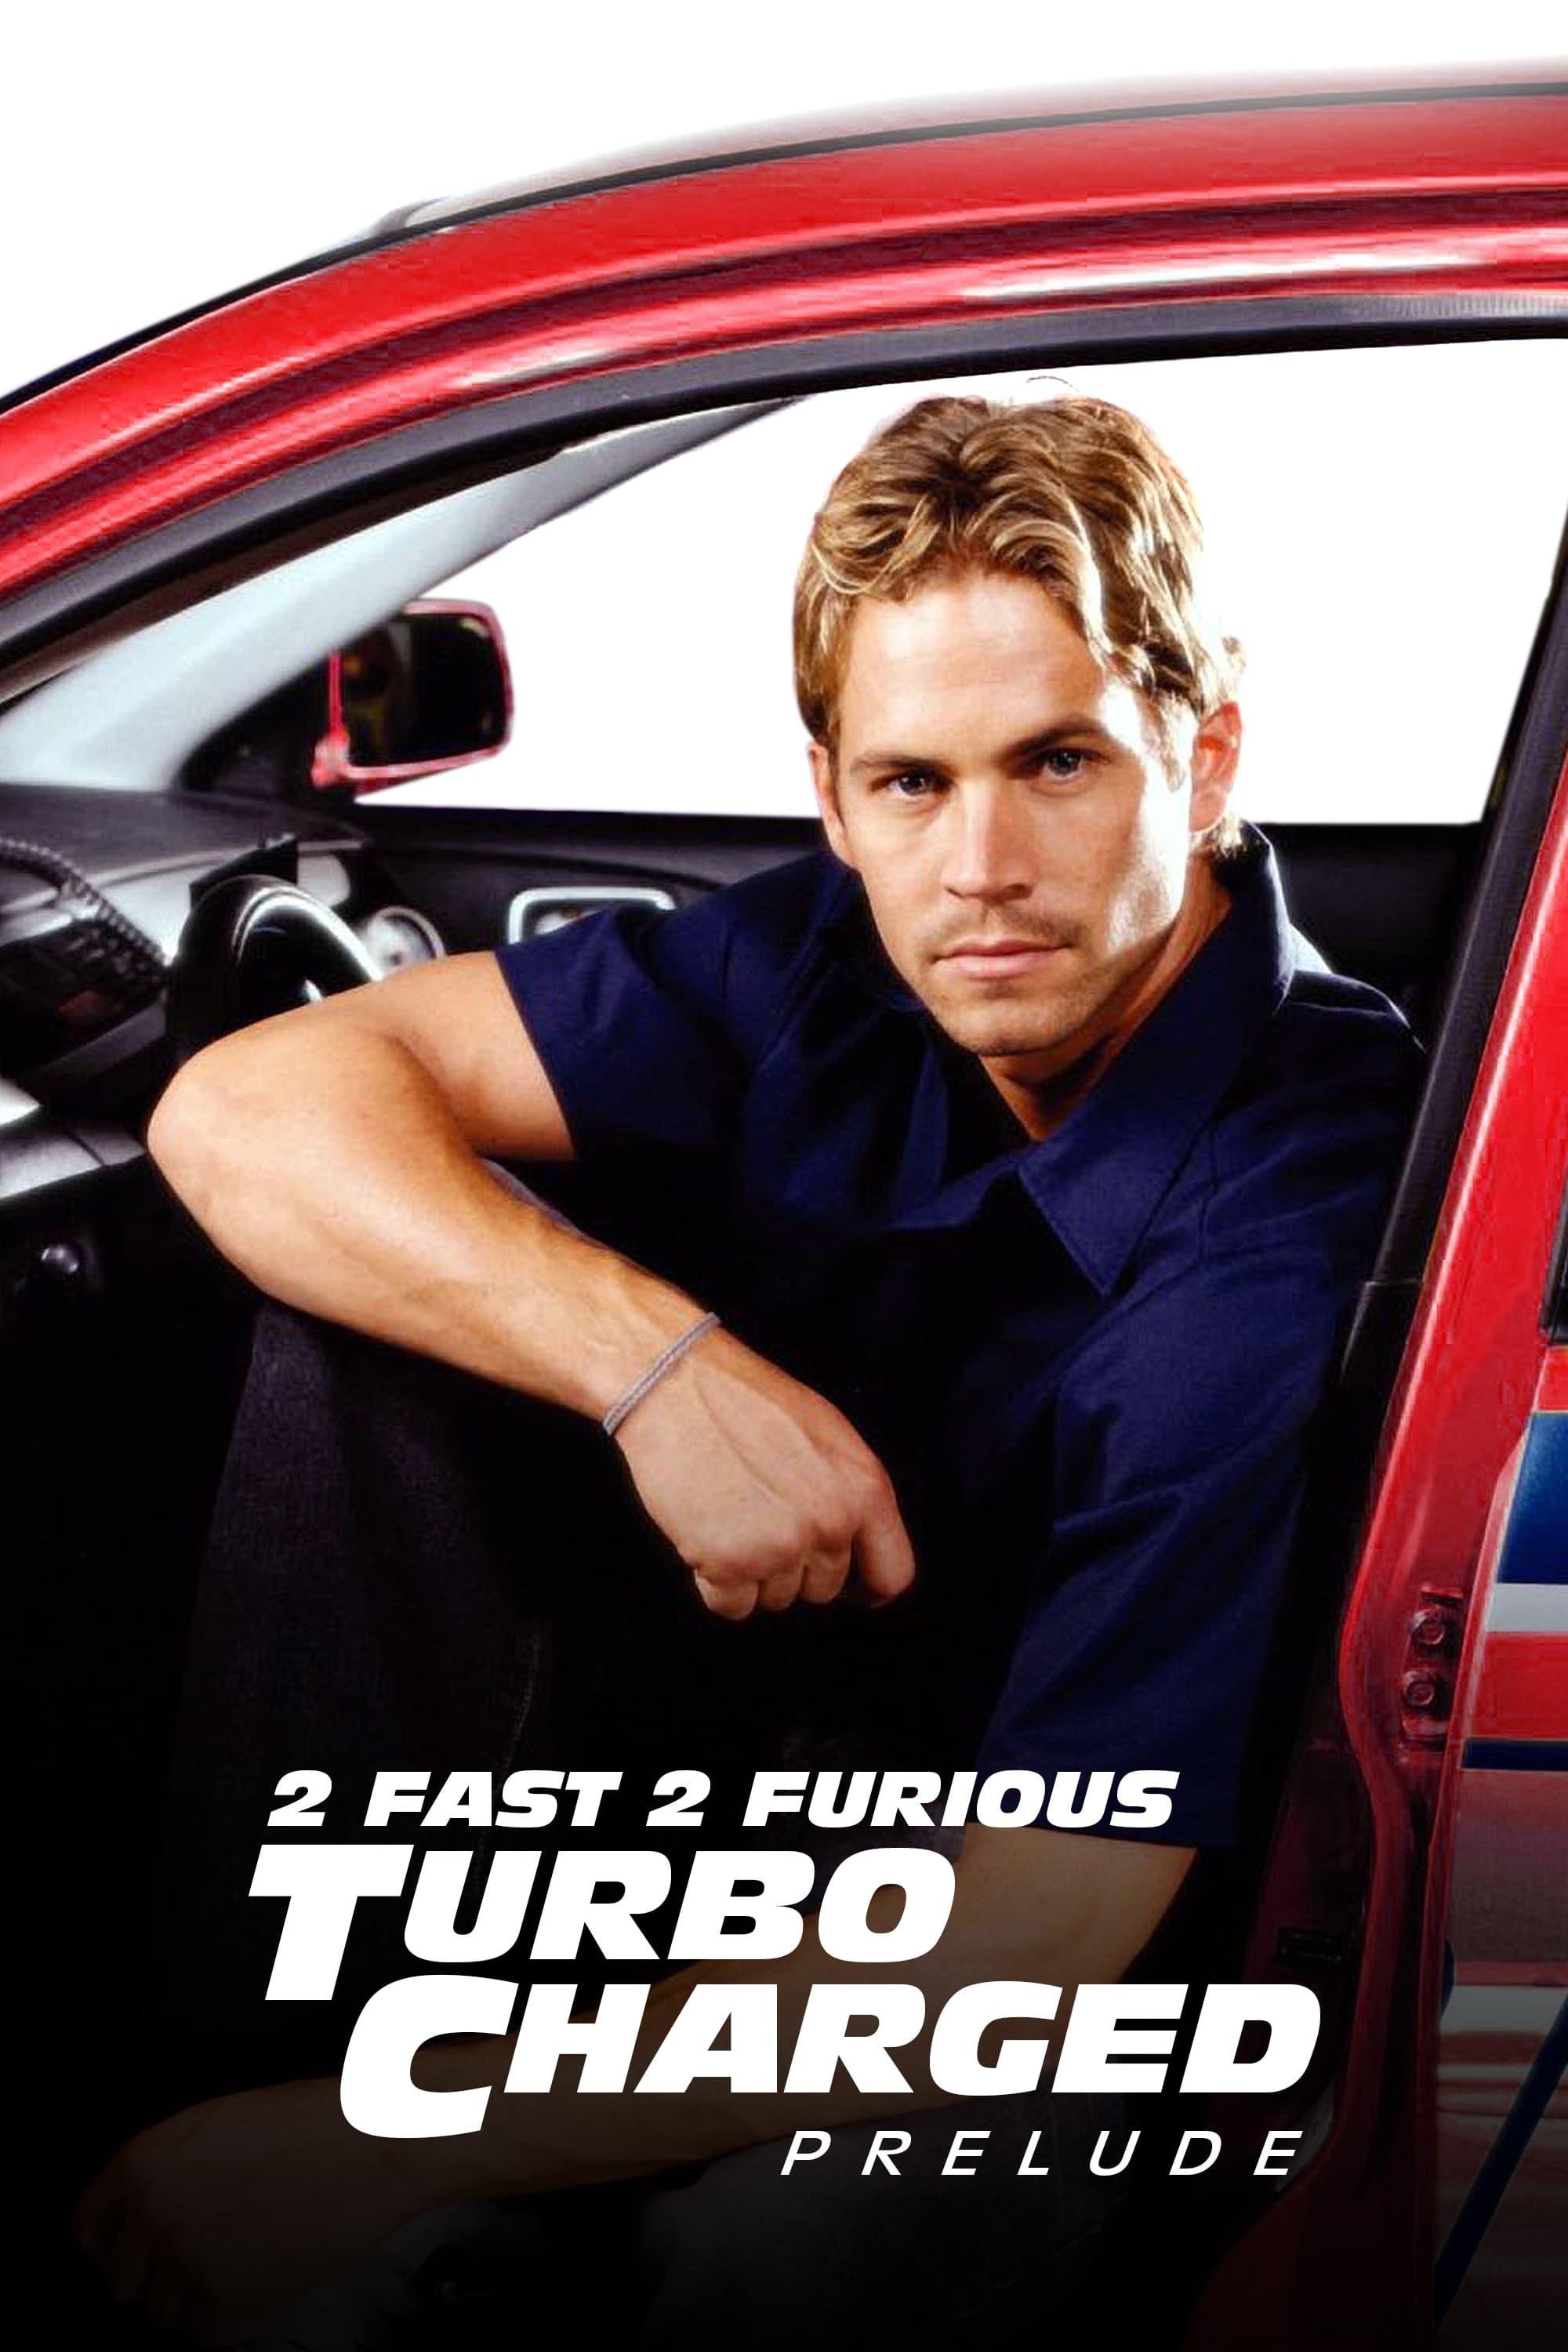 Turbo charged prelude full movie download